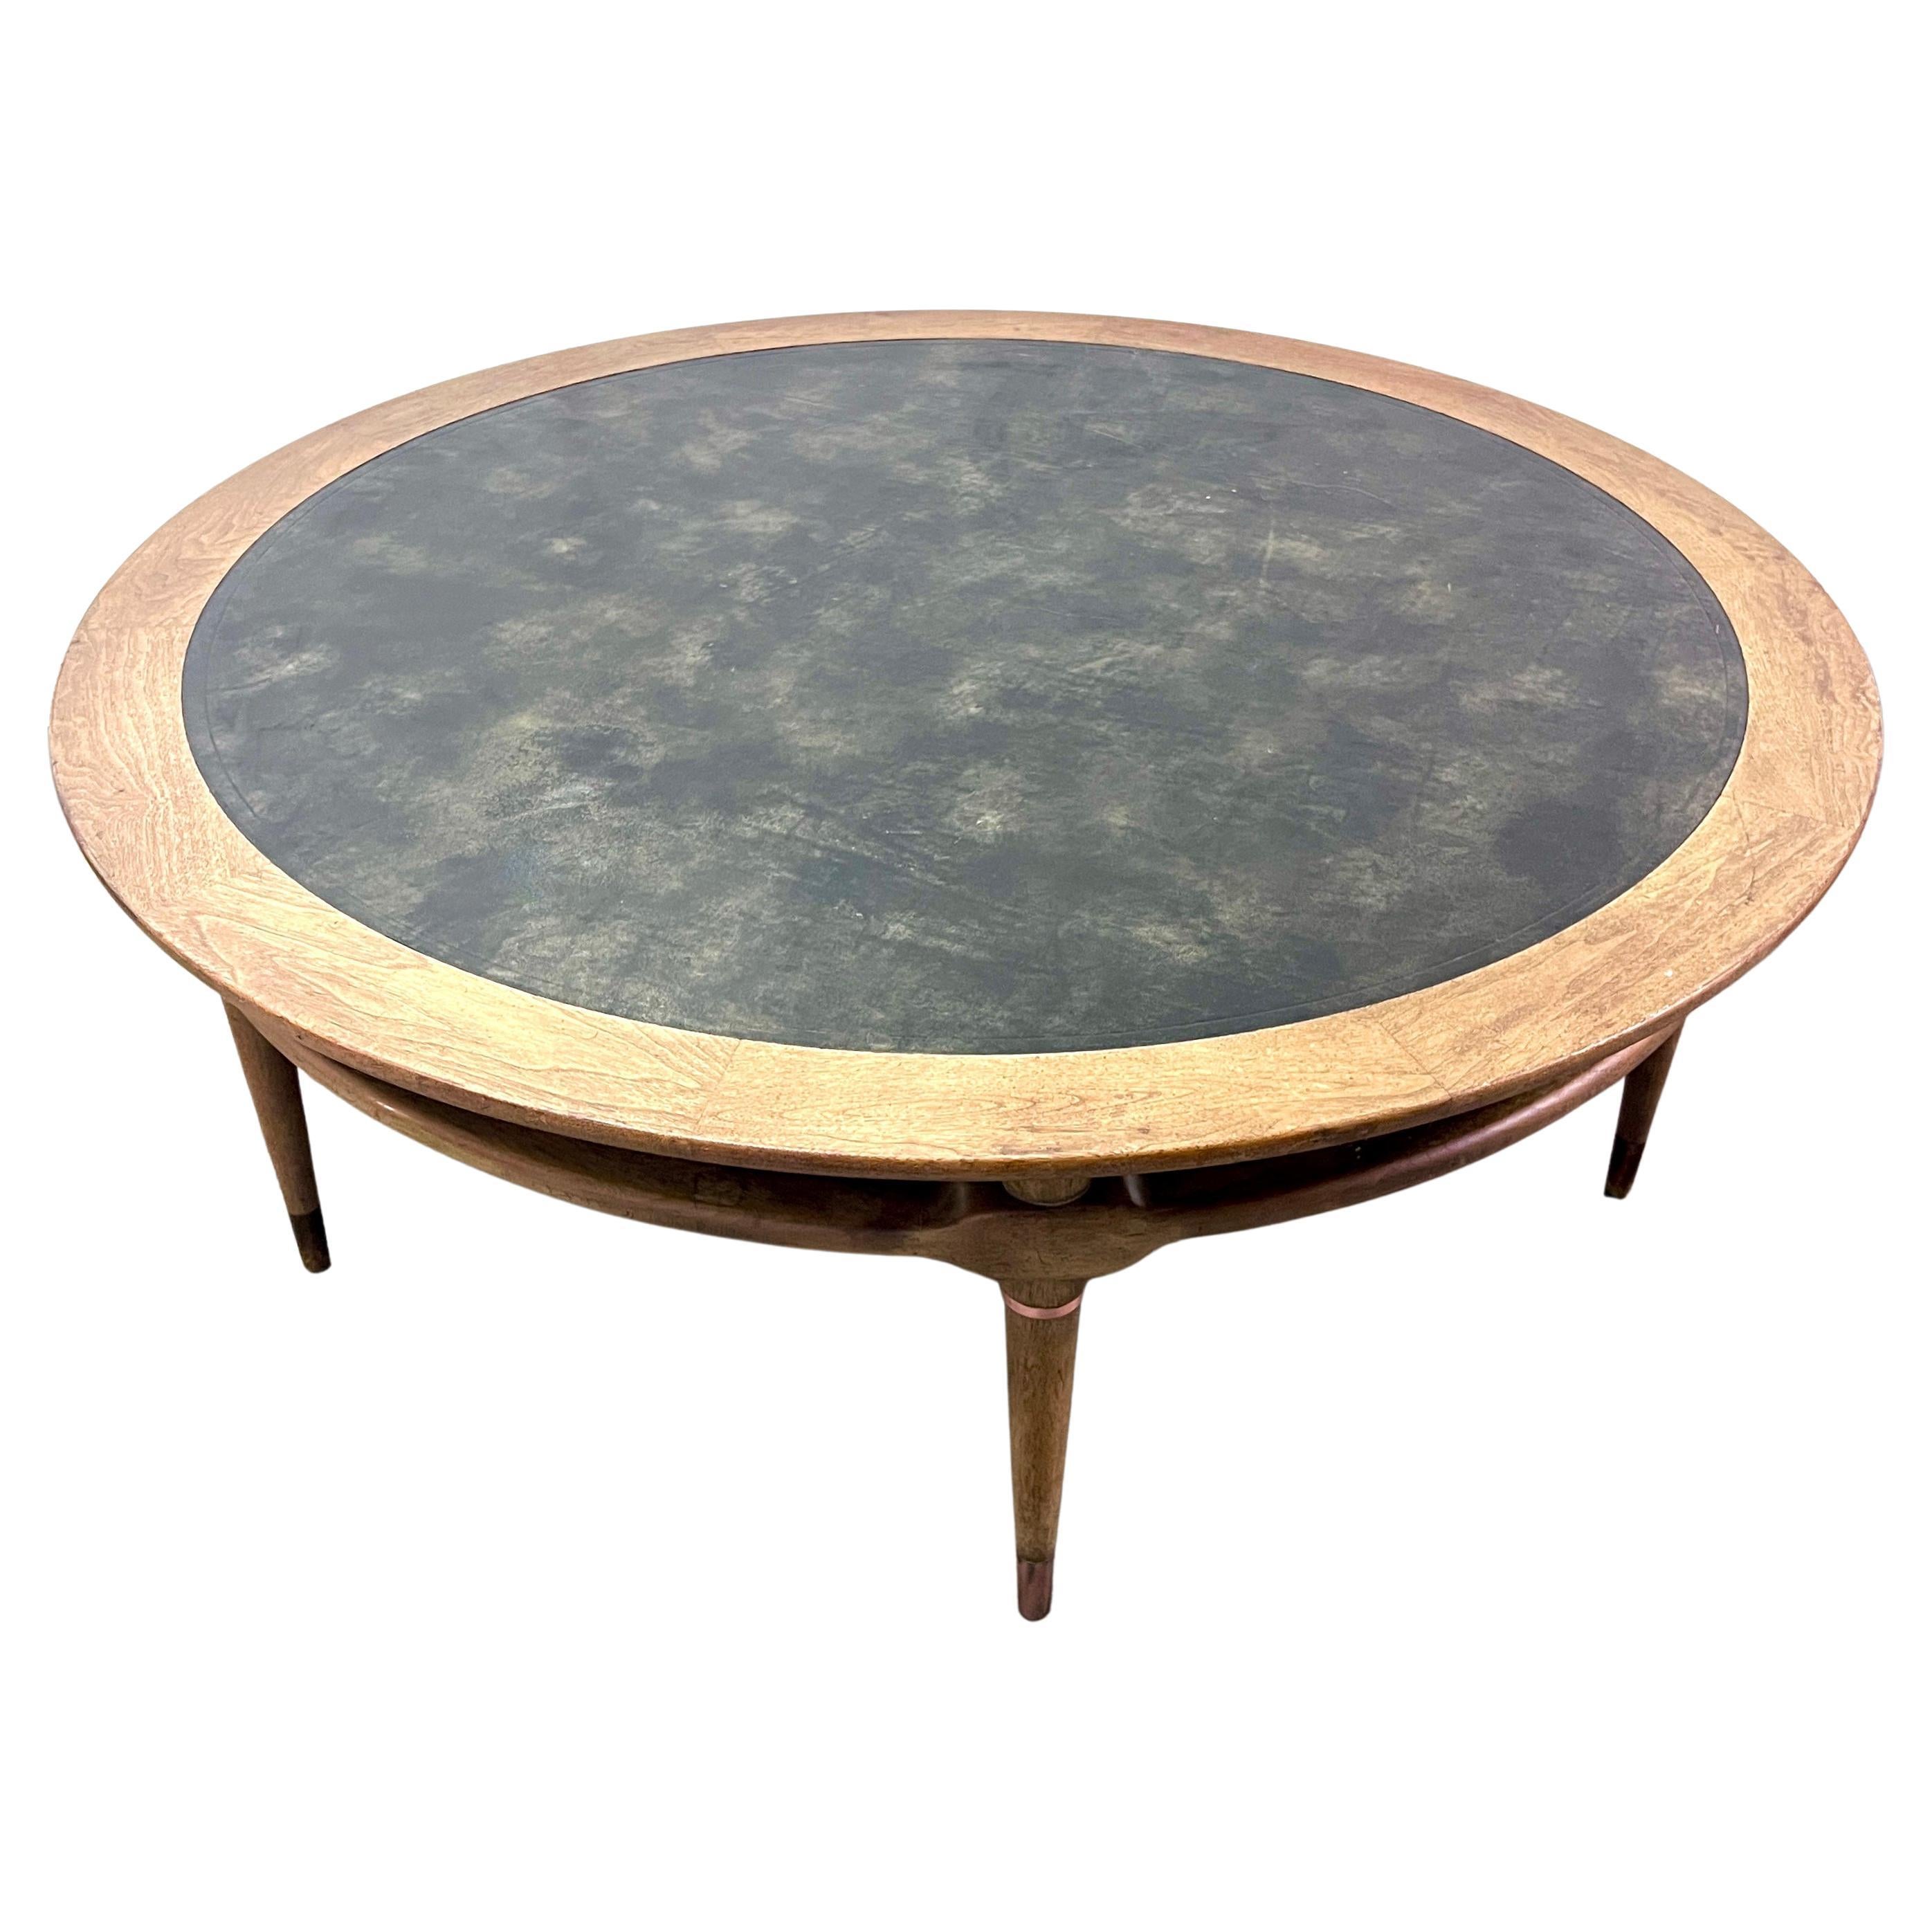 A wonderful and large Round cocktail table with a foil / Black tooled leather top.  The table is a compliment to any room that is in need of a large round table - roomy enough for stacks of books and decor and sturdy enough to also rest your feet